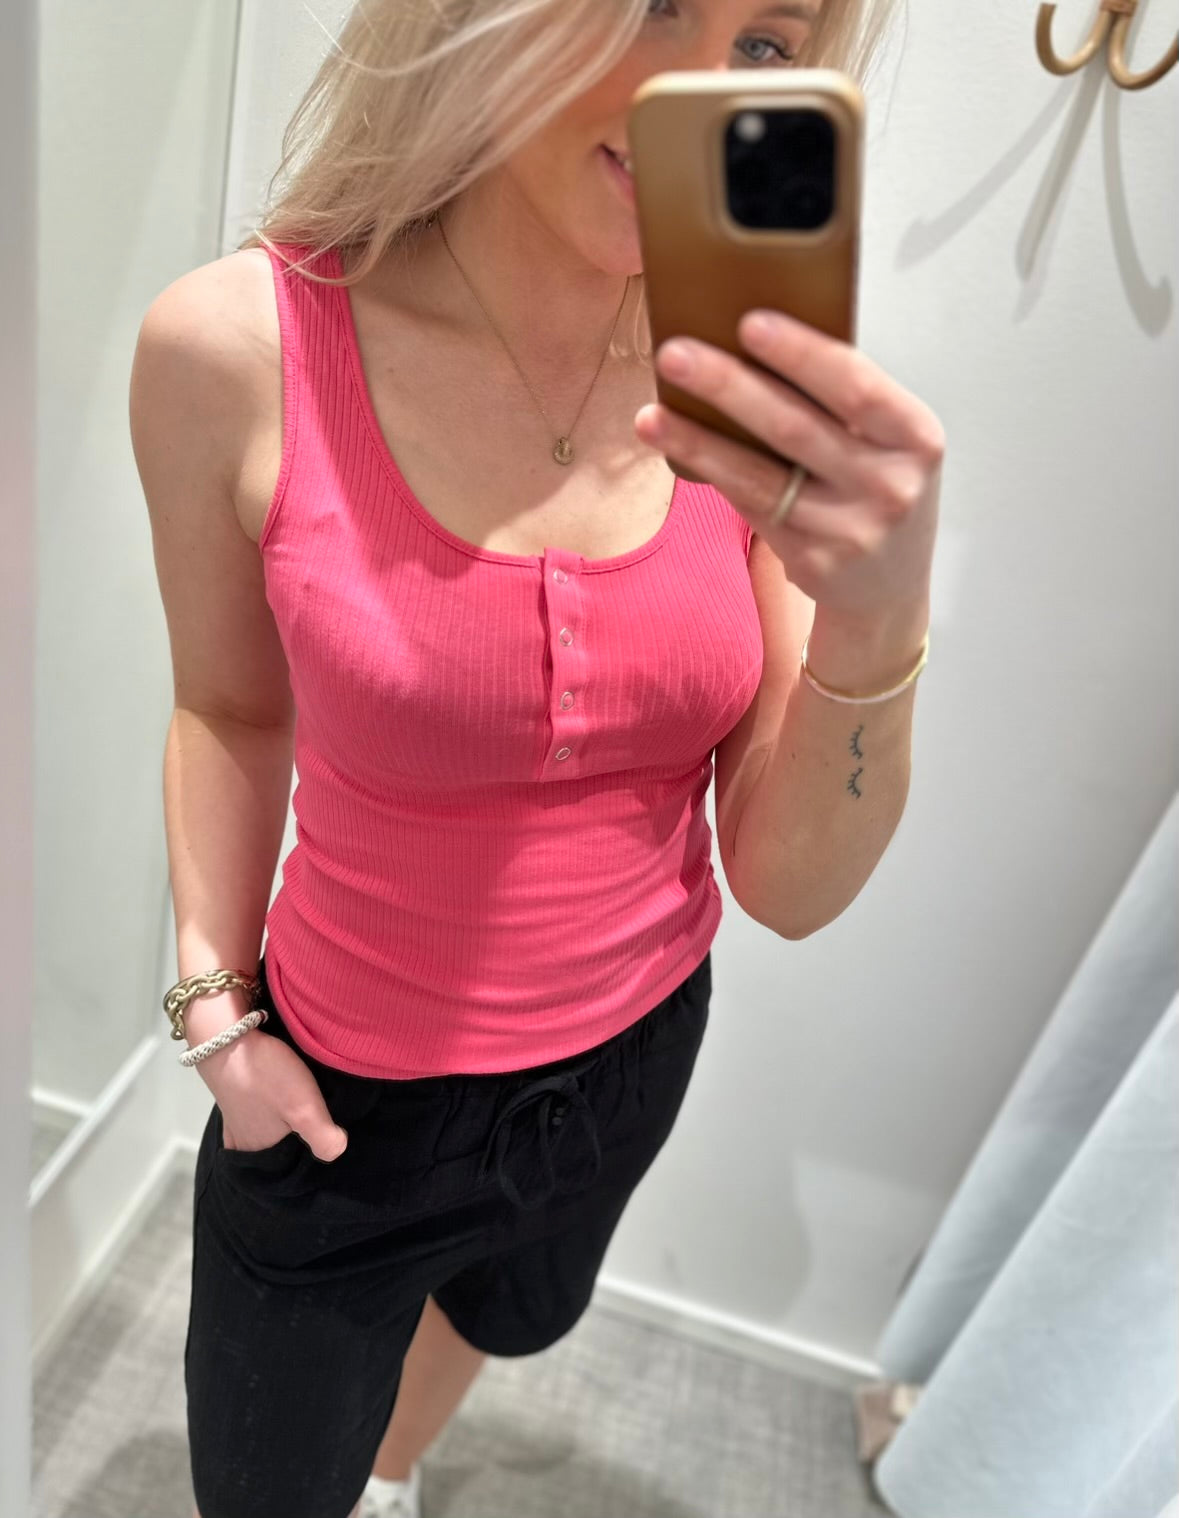 PIECES - KITTE TANK TOP - HOT PINK